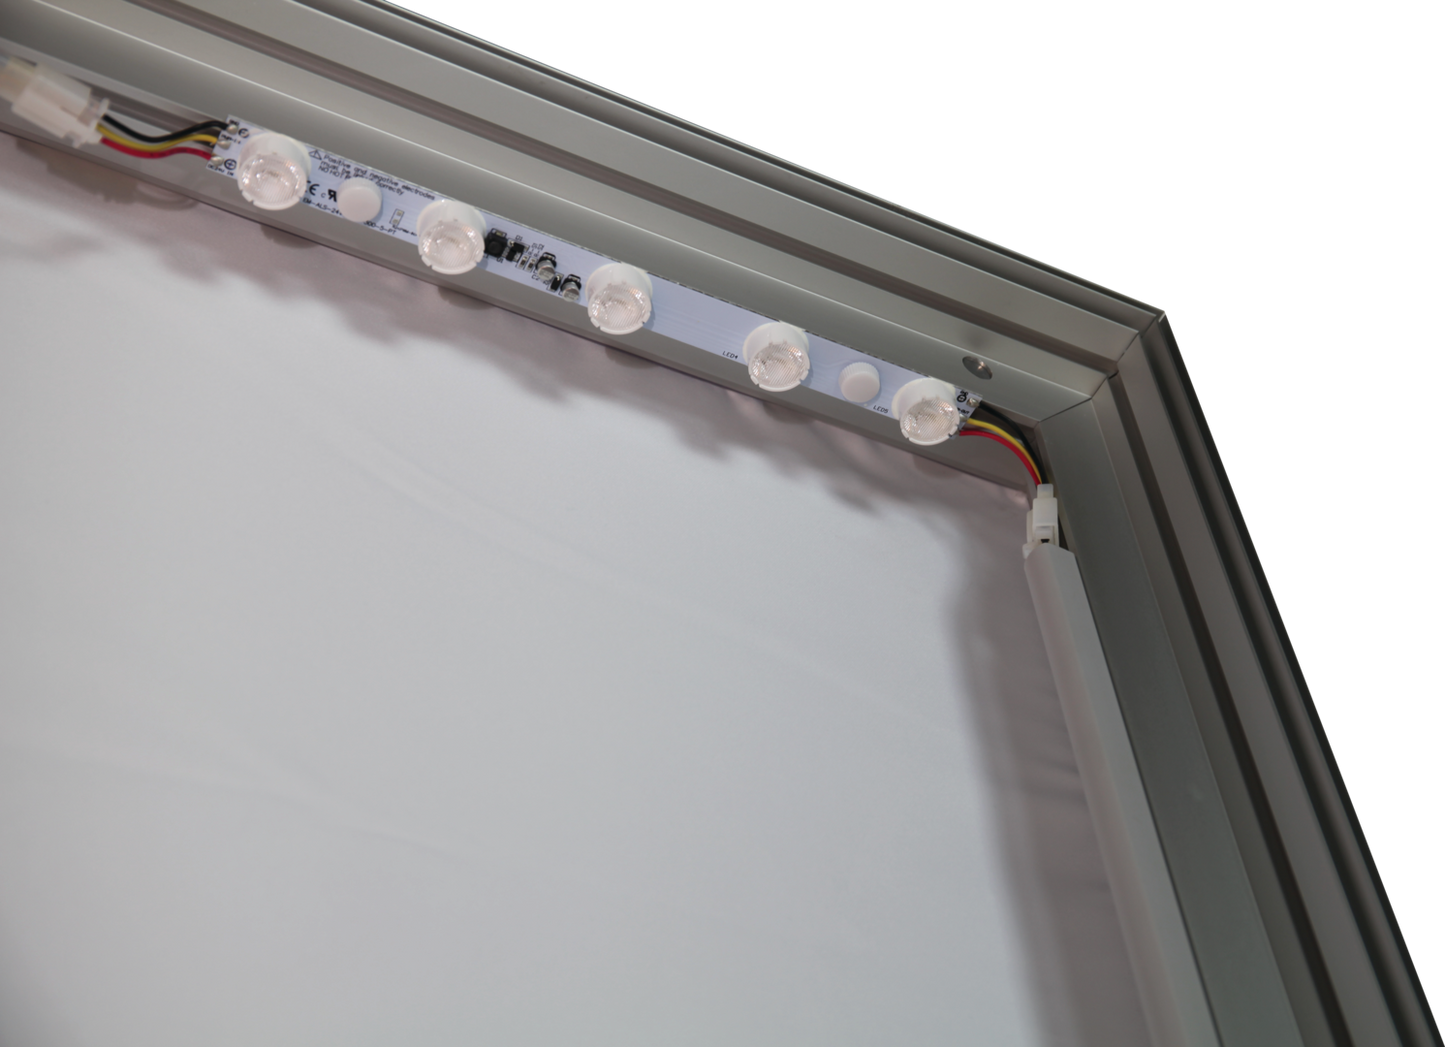 40ft x 3ft Vector Frame Hanging Light Box Double-Sided (Graphic Only)